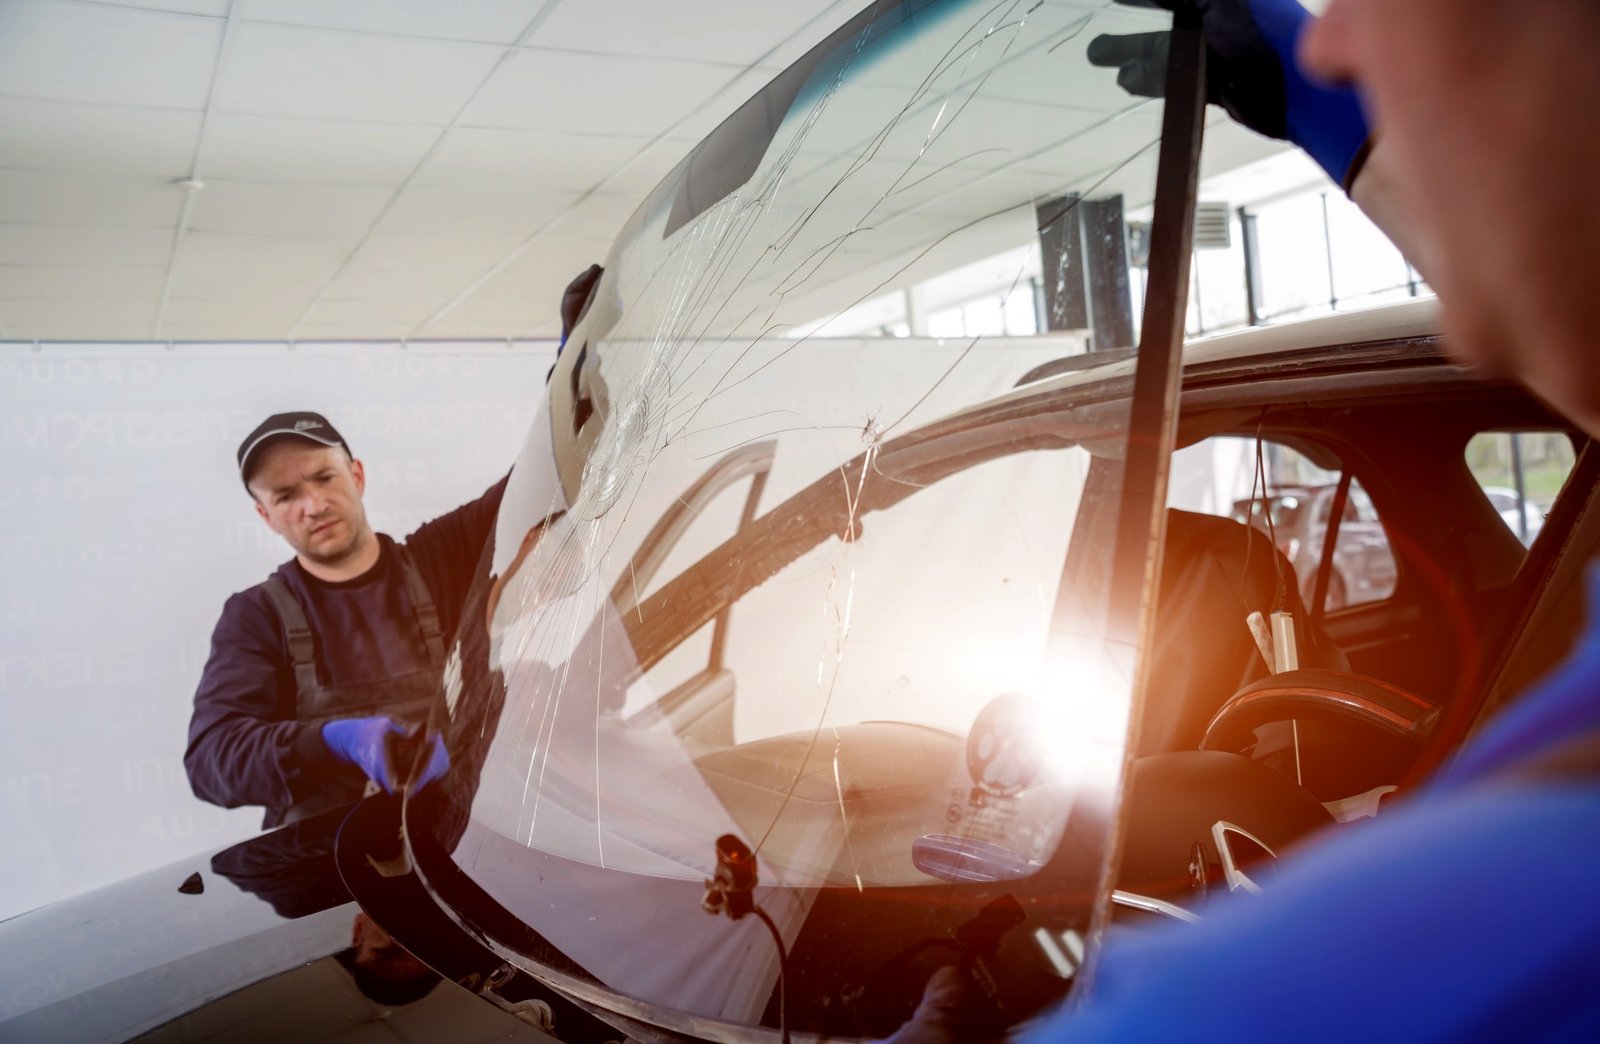 Windshield Repair Yorba Linda CA - Auto Glass Repair and Replacement Services with Orange Mobile Auto Glass